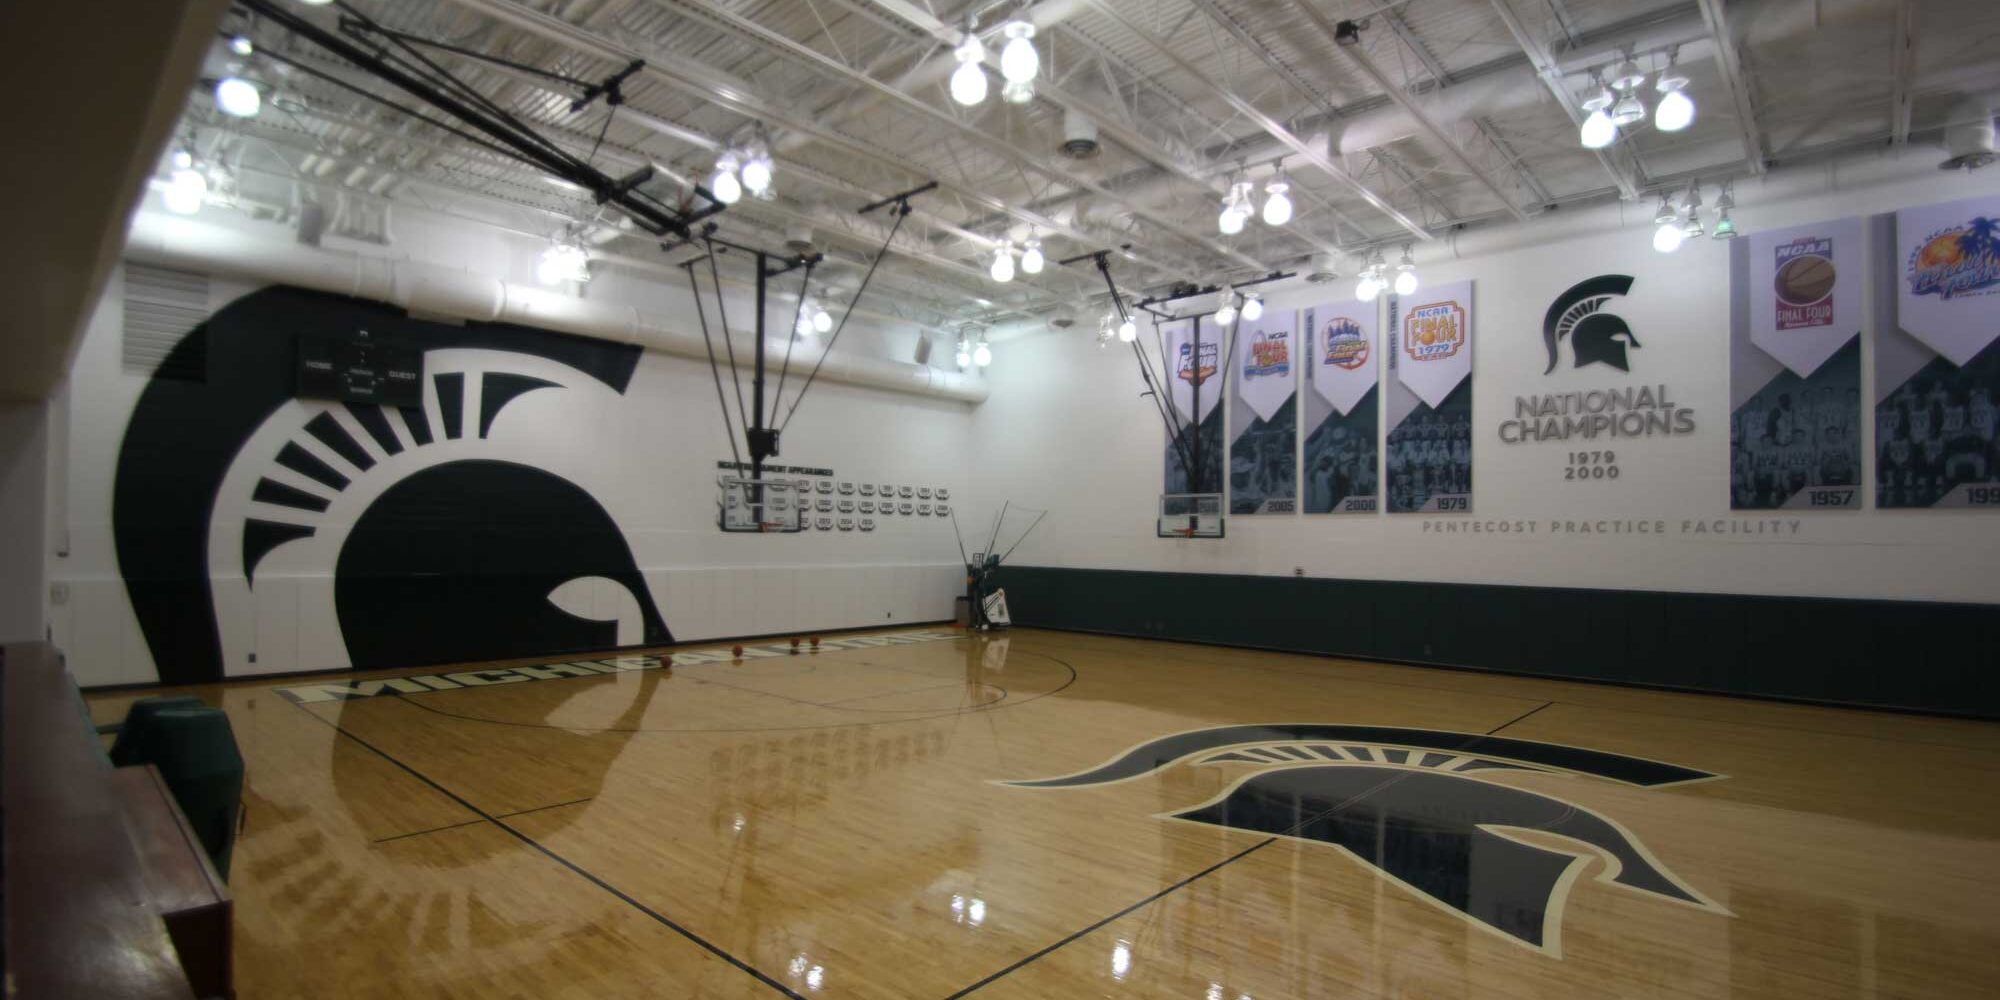 training facility for a college basketball team in michigan